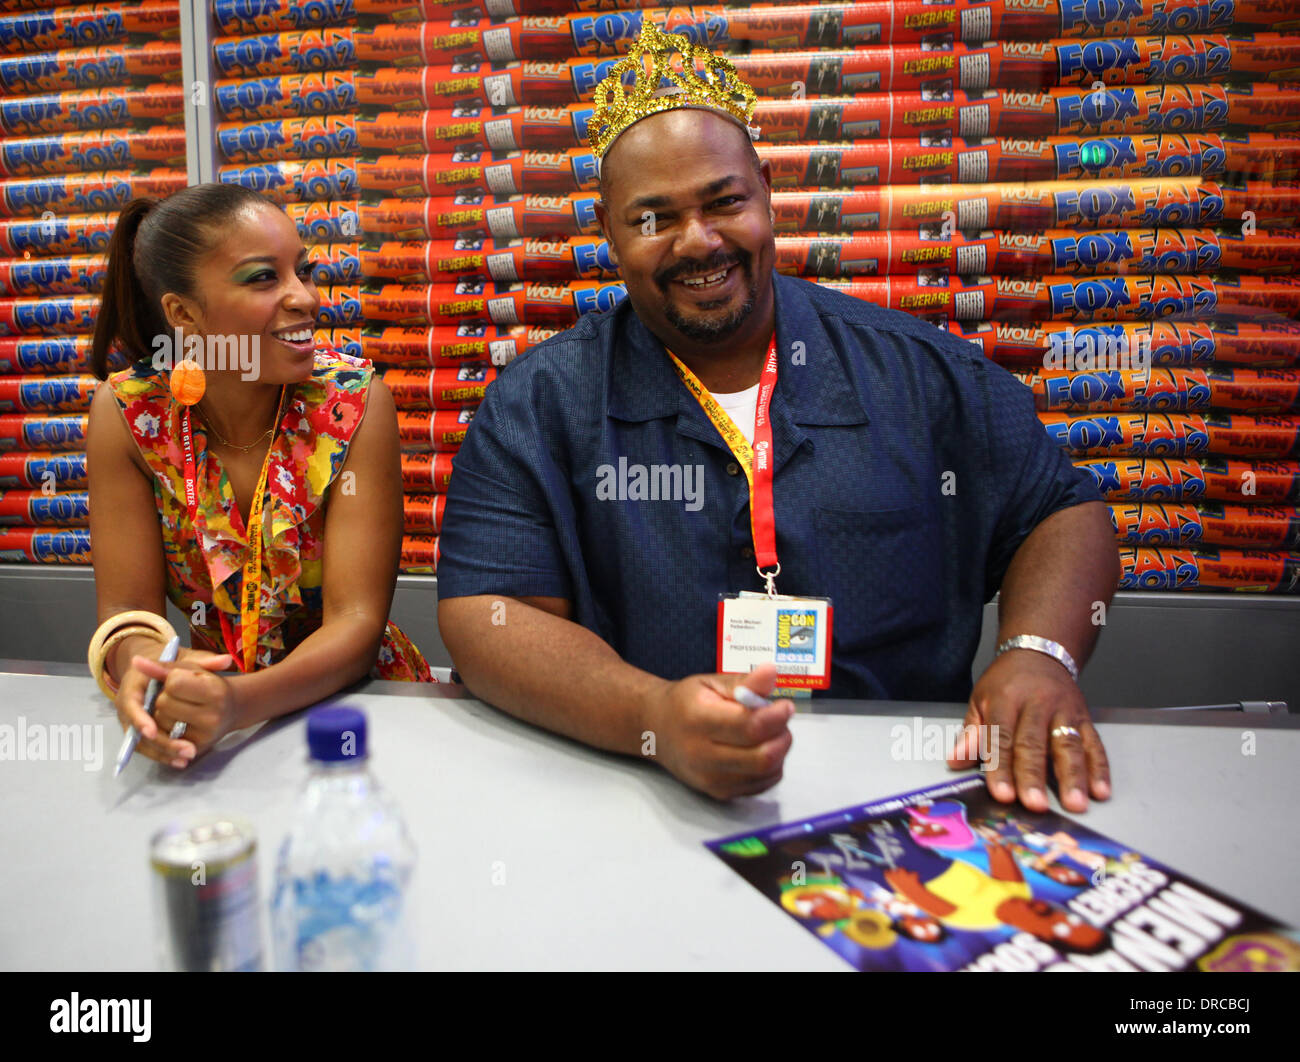 Reagan Gomez-Preston and Kevin Michael Richardson San Diego Comic-Con 2012 - 'The Cleveland Show' - Booth Signing San Diego, California - 15.07.12 Stock Photo